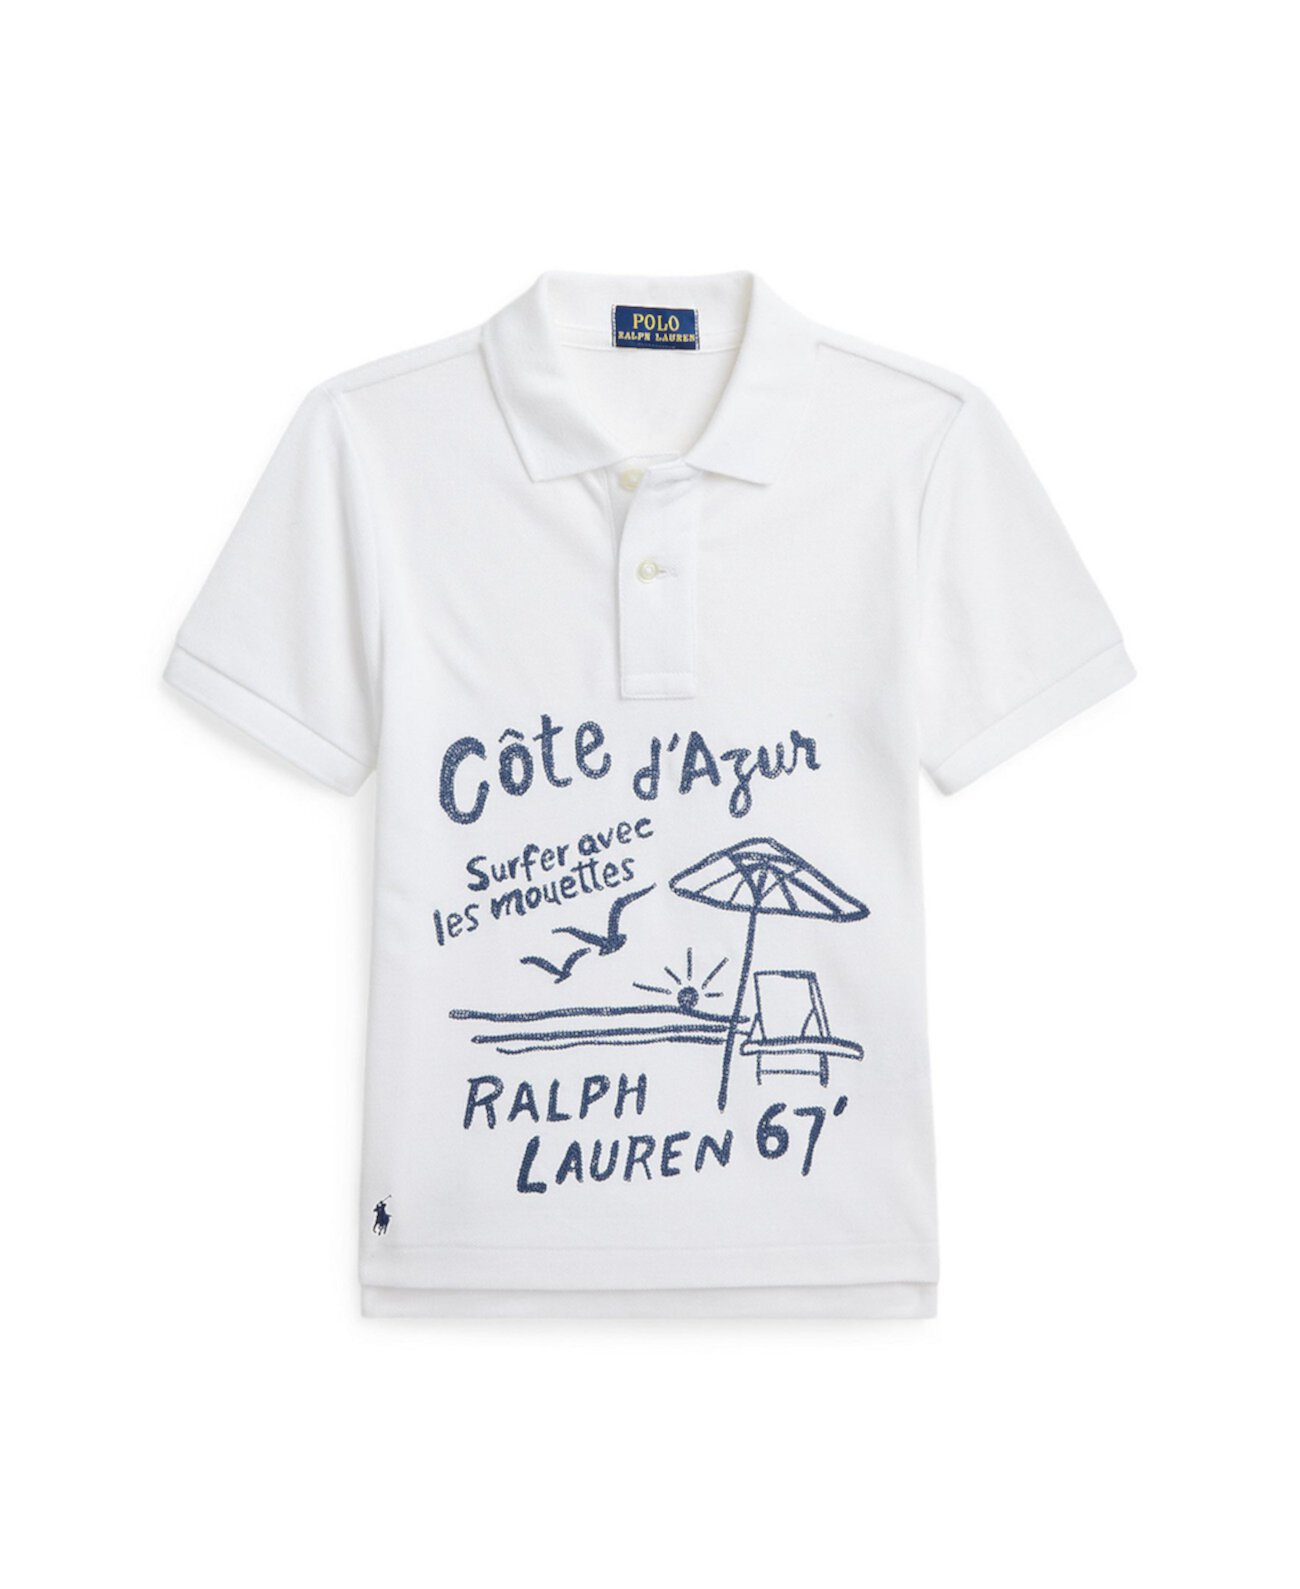 Toddler and Little Boys Embroidered Cotton Mesh Polo Shirt Polo Ralph Lauren